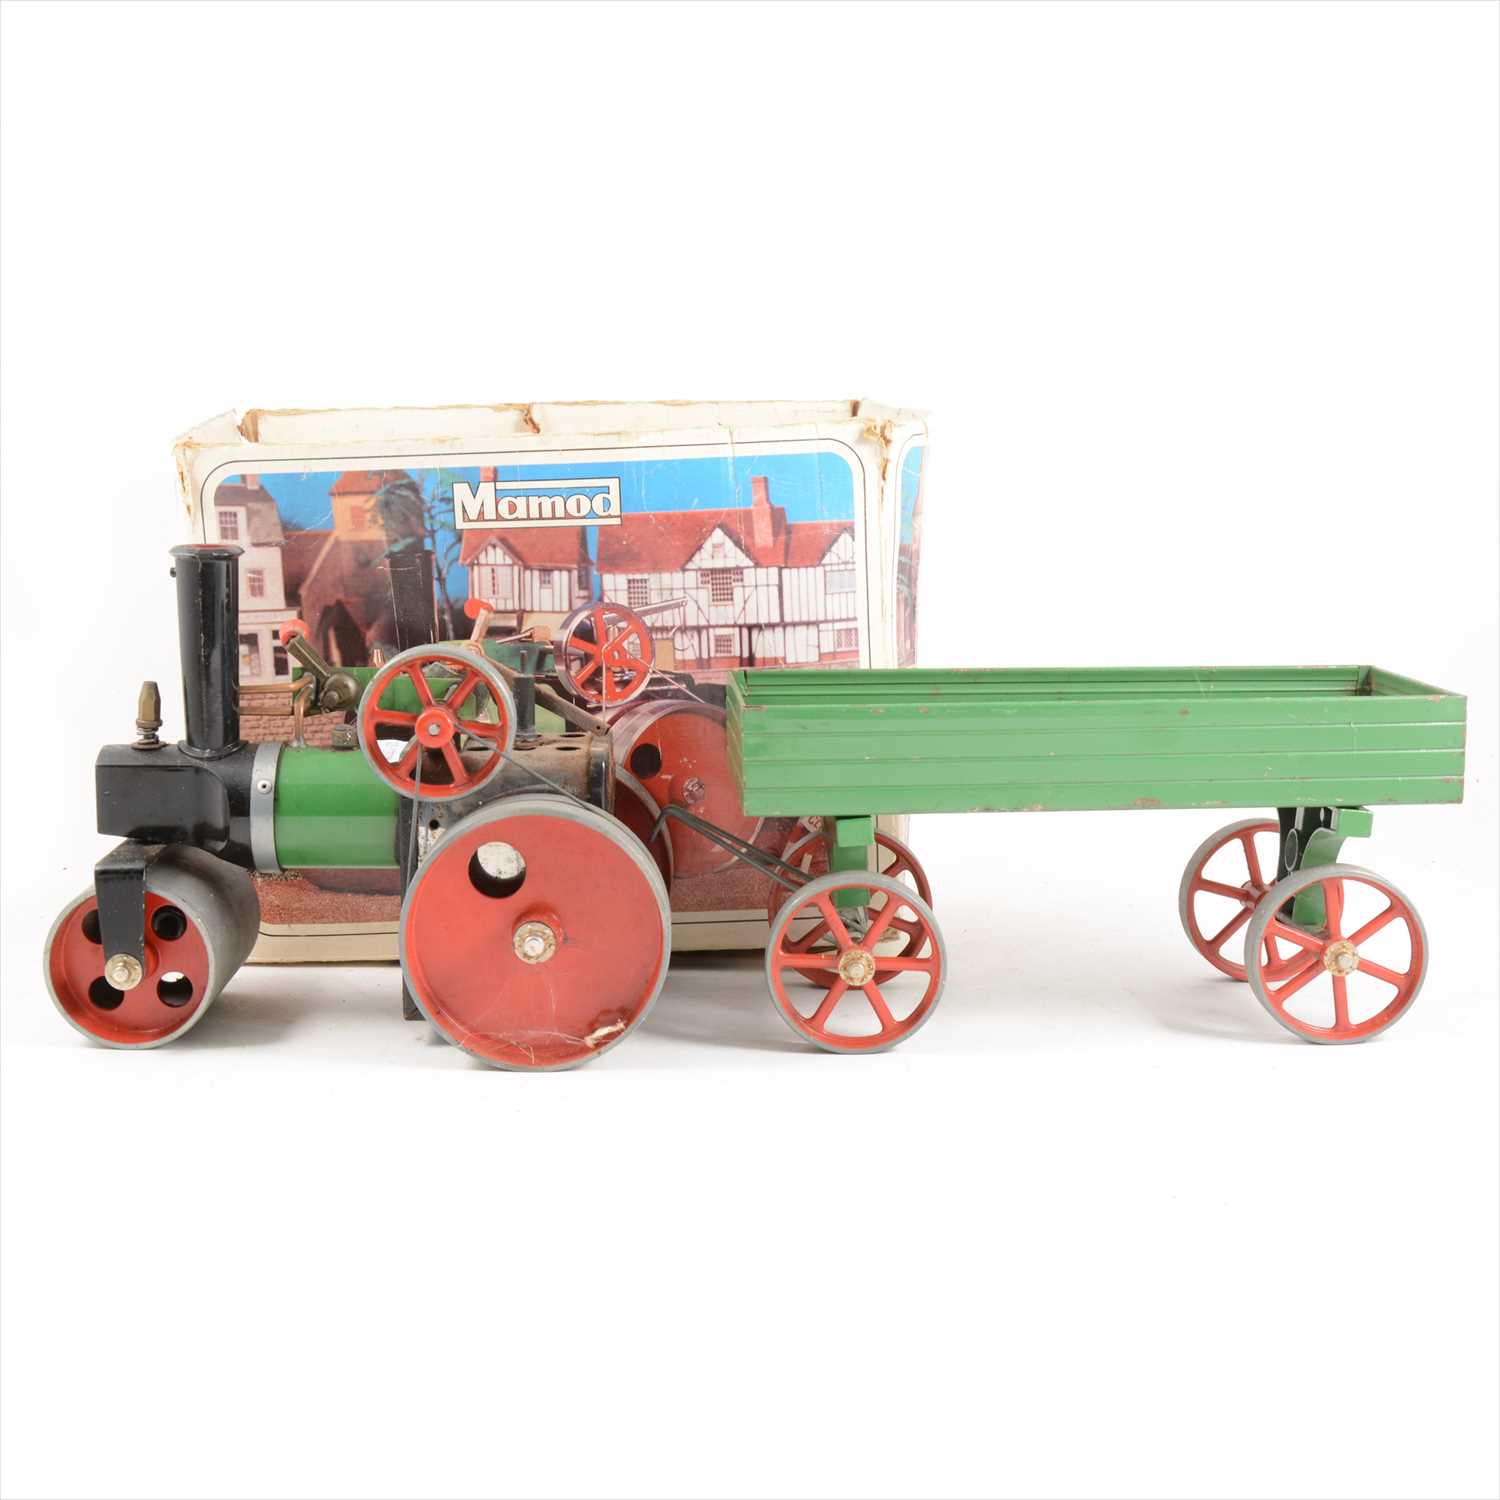 Lot 23 - Mamod live steam; SR1a steam roller engine, boxed and a green trailer wagon, unboxed.